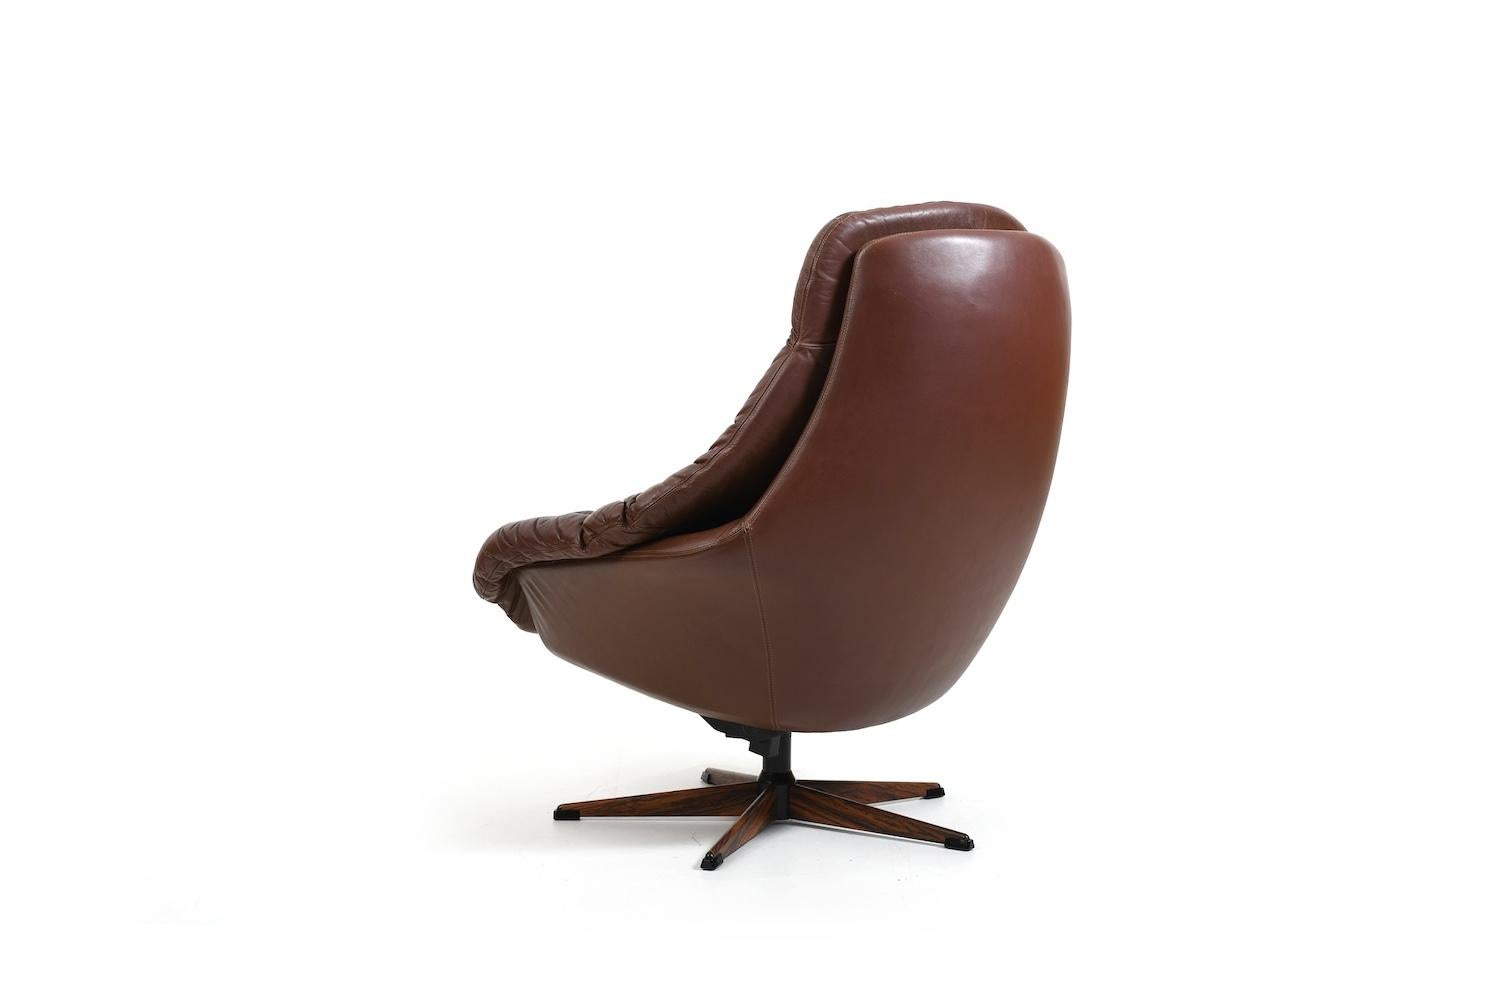 Henry W. Klein Leather Swivel Lounge Chair 1960s In Good Condition For Sale In Handewitt, DE